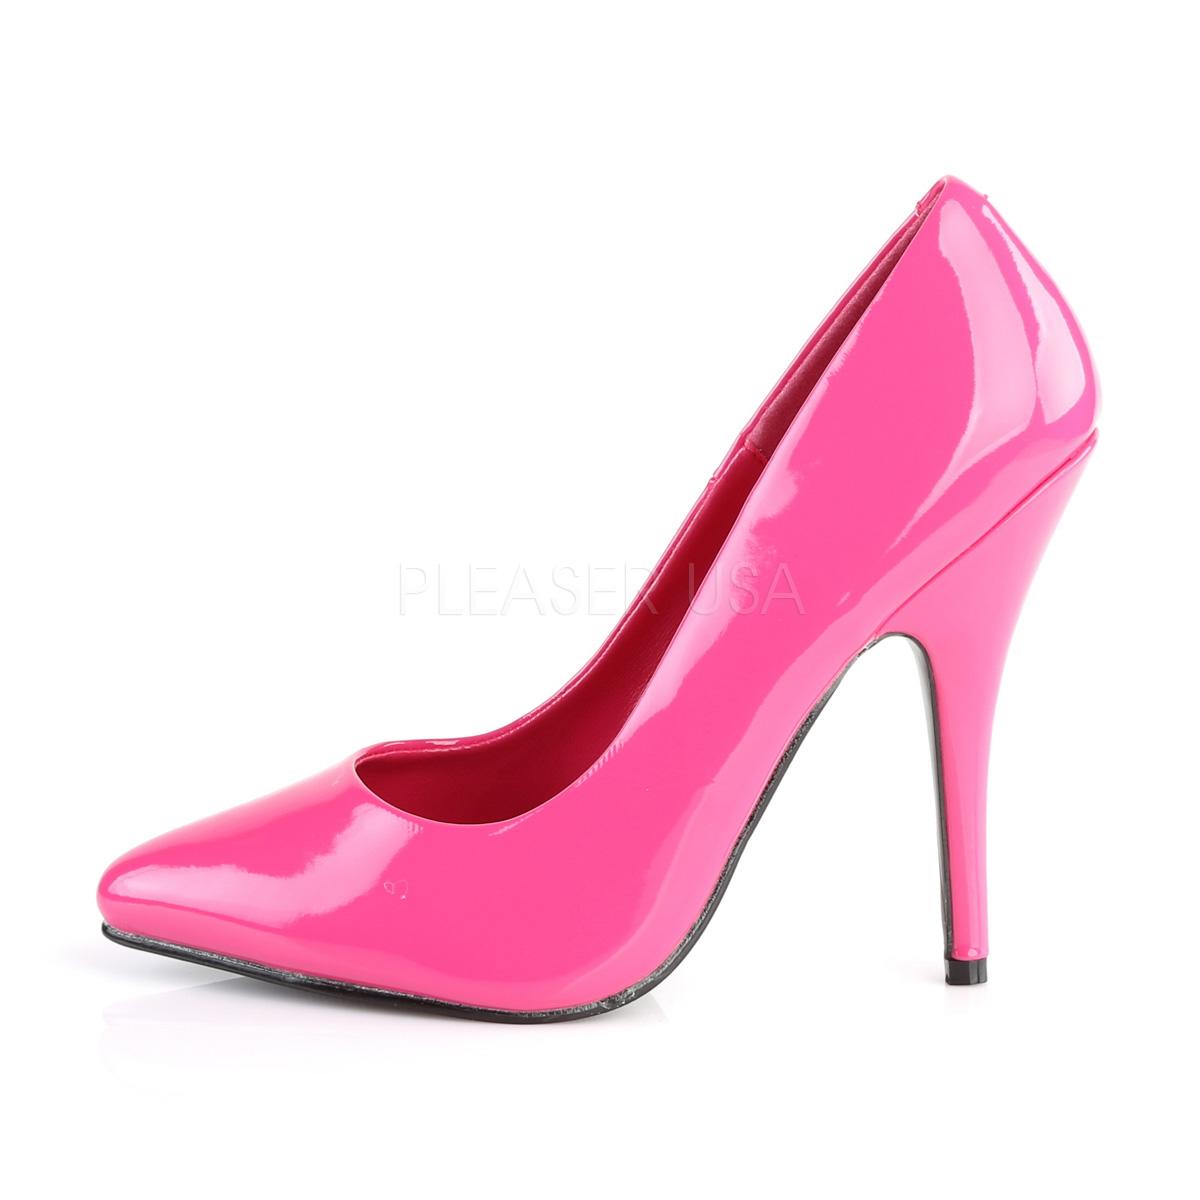 Hot Pink Patent Court Shoe